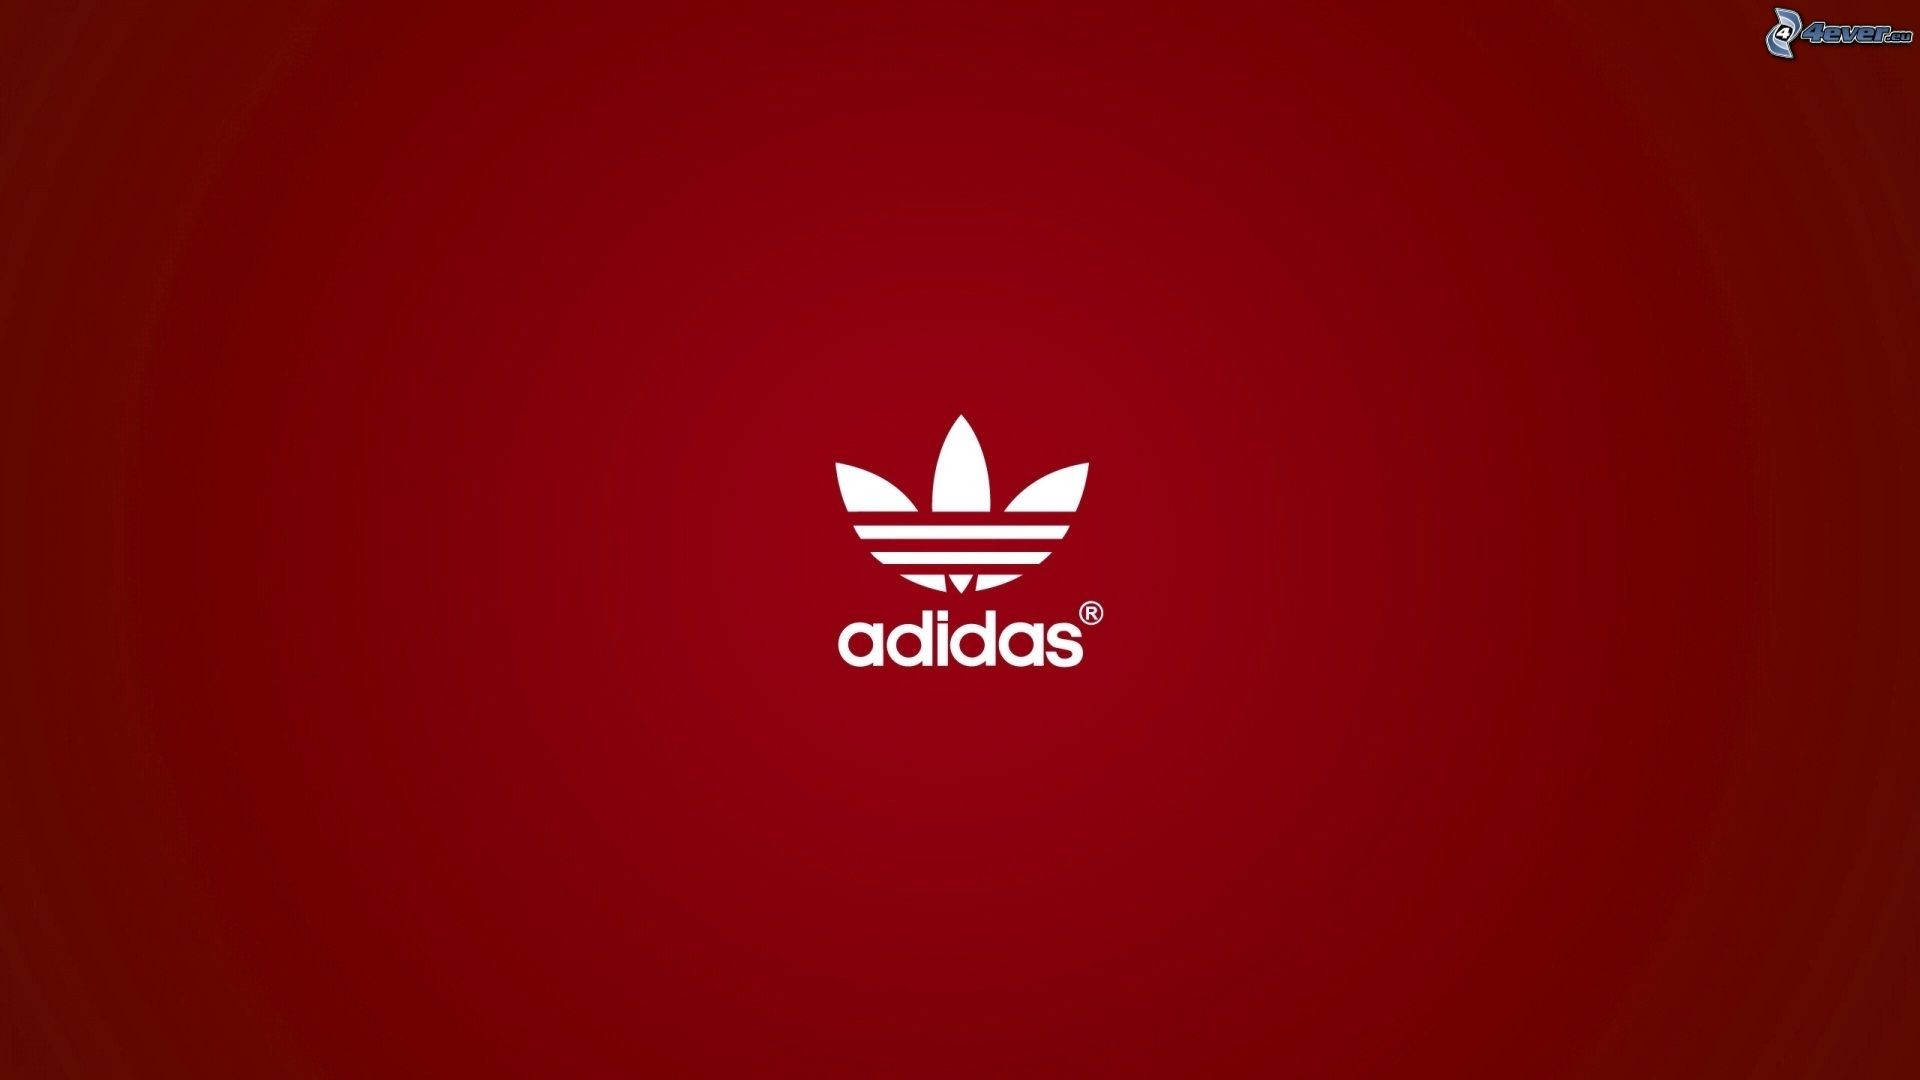 Show your bold style with the iconic Adidas red logo Wallpaper